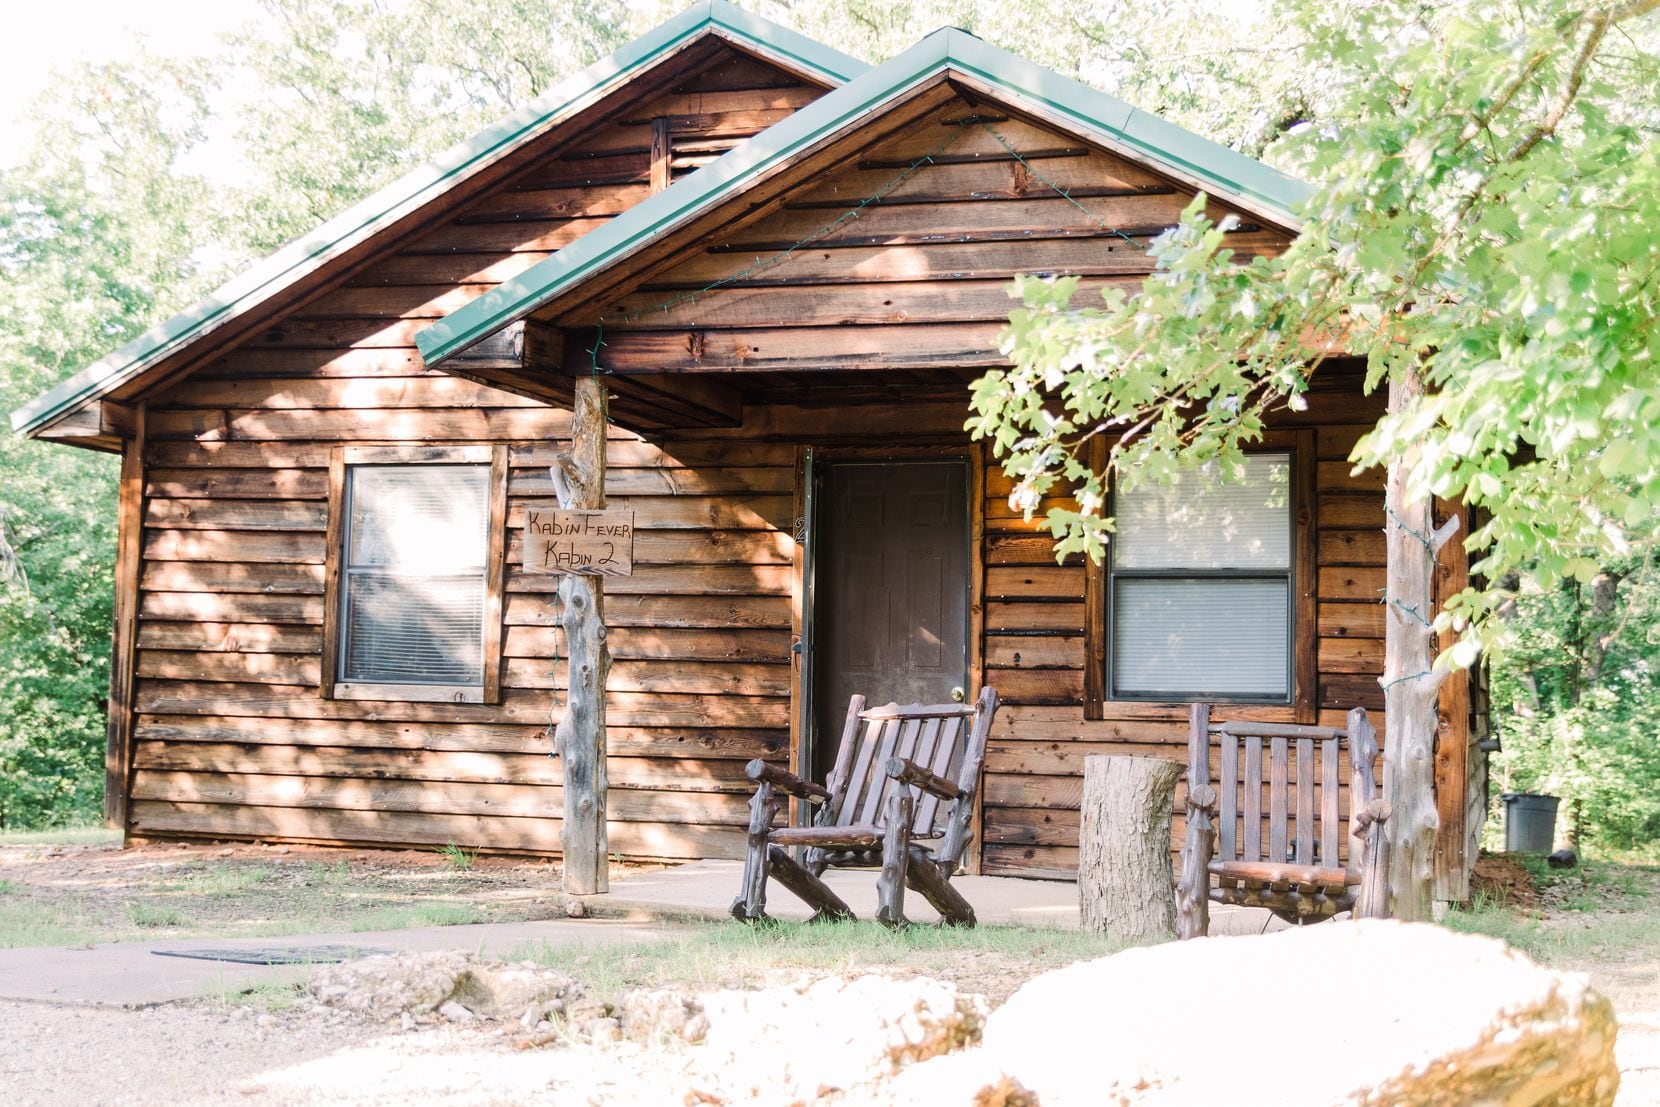 Rocky Point Cabins visitors are nestled near the Chickasaw National Recreation Area and Lake of the Arbuckles, with Turner Falls State Park less than 30 minutes away.